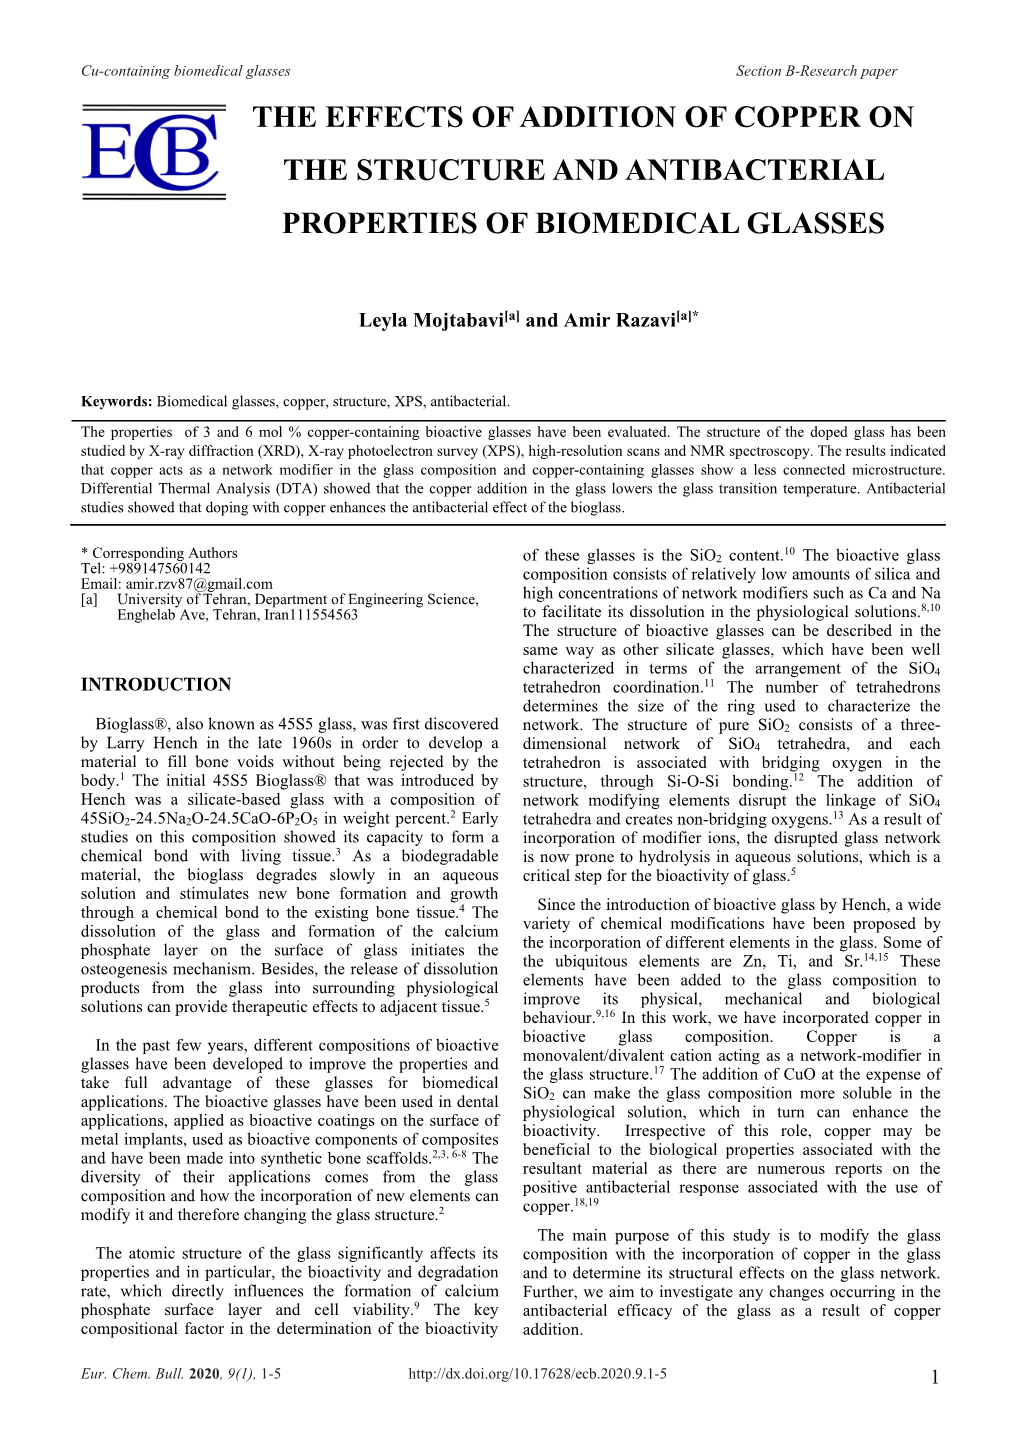 The Effects of Addition of Copper on the Structure and Antibacterial Properties of Biomedical Glasses